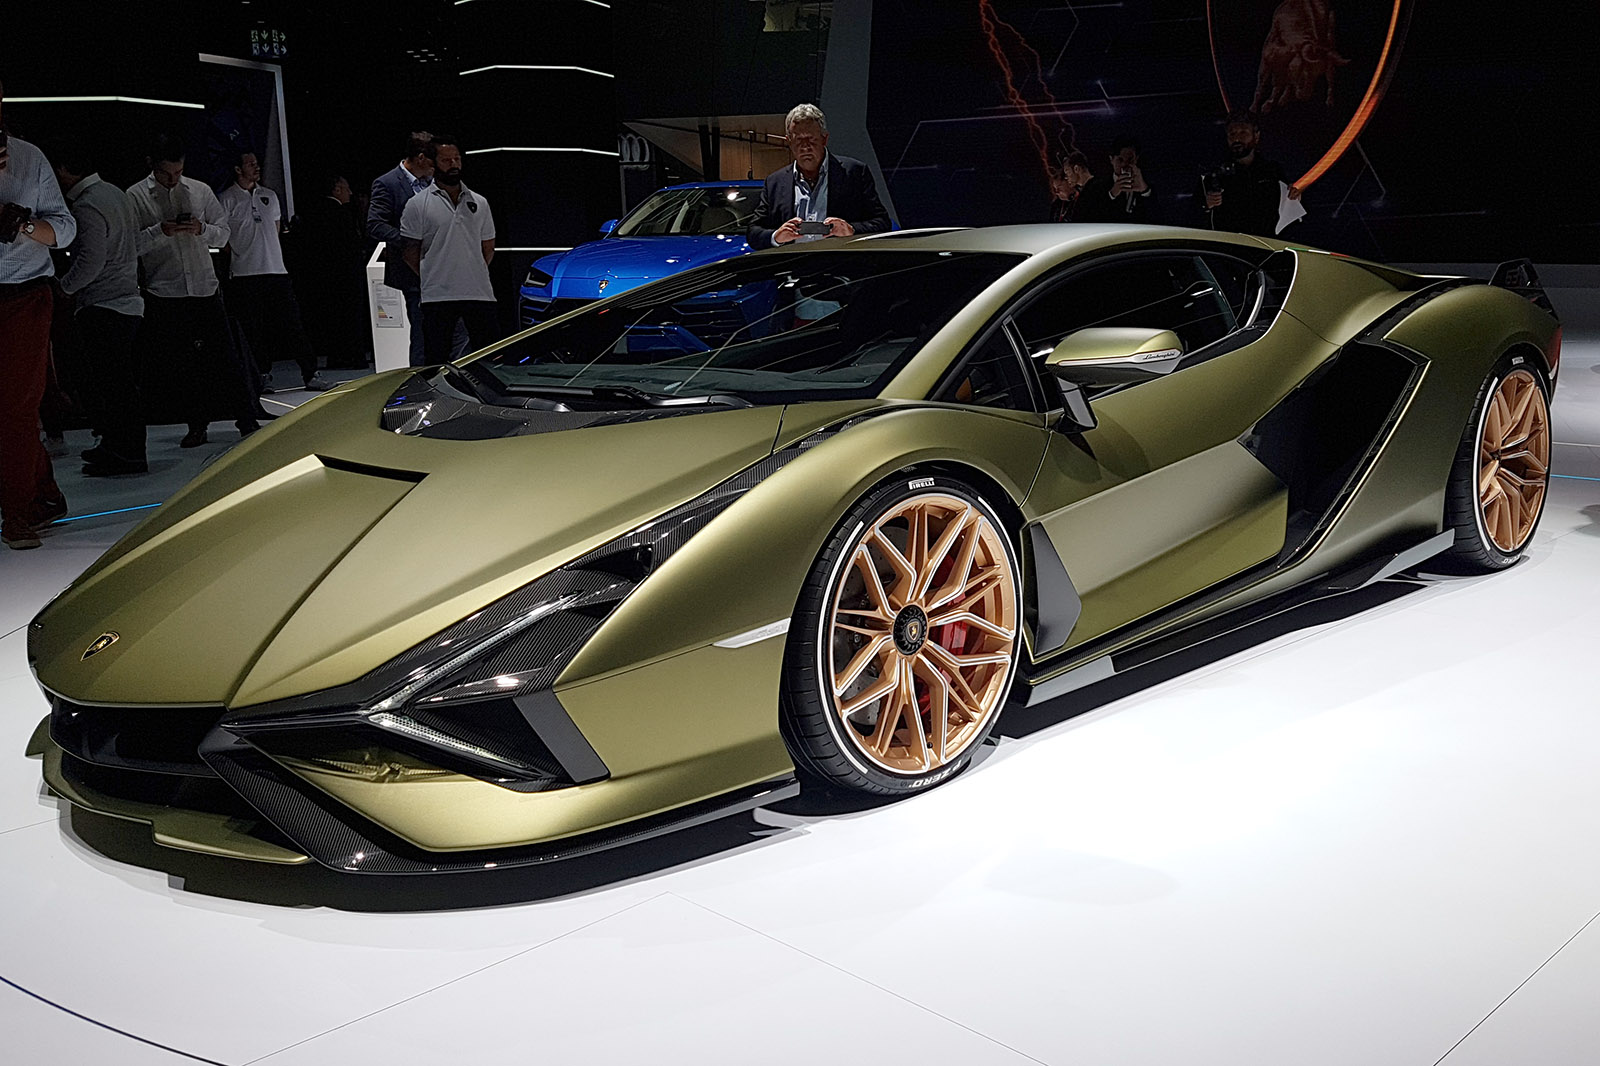 Lamborghini Sian Officially Debuts Tomorrow, But You Can See It Now